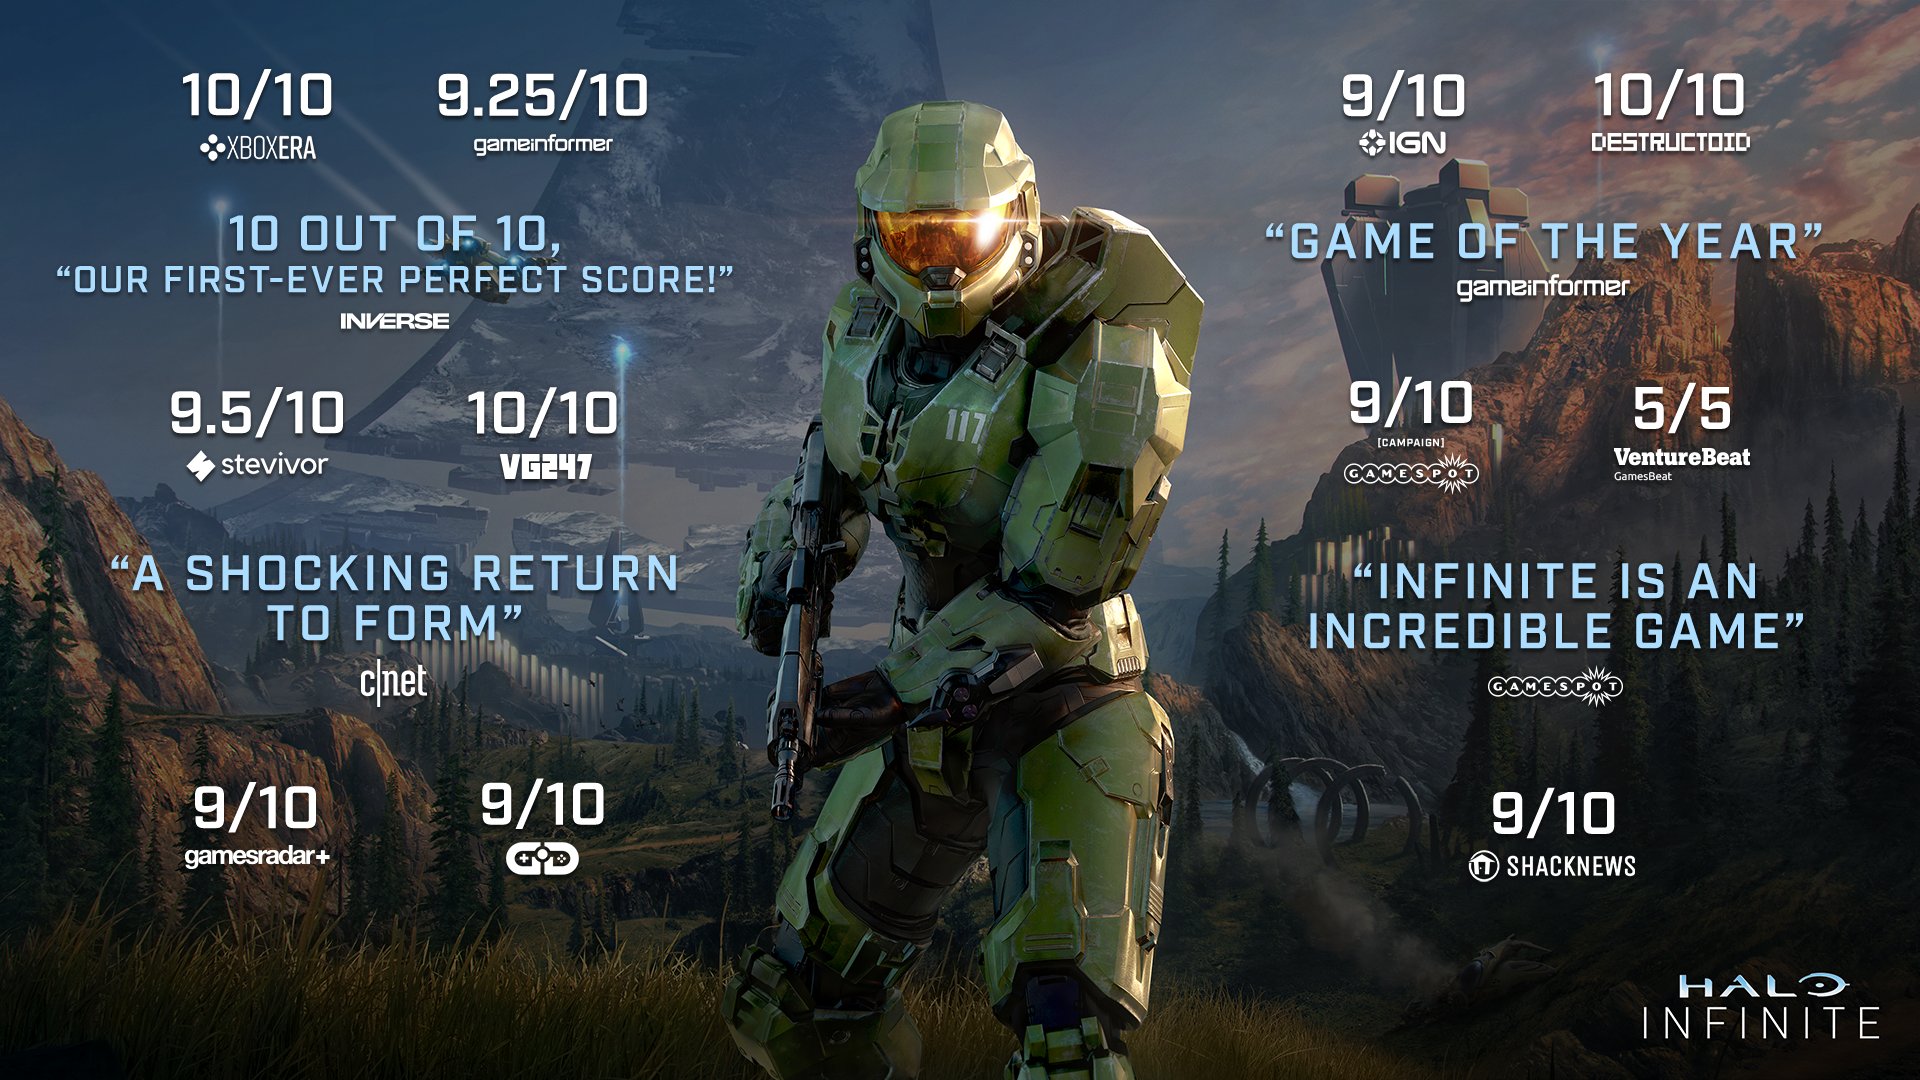 Halo: The Master Chief Collection - Metacritic